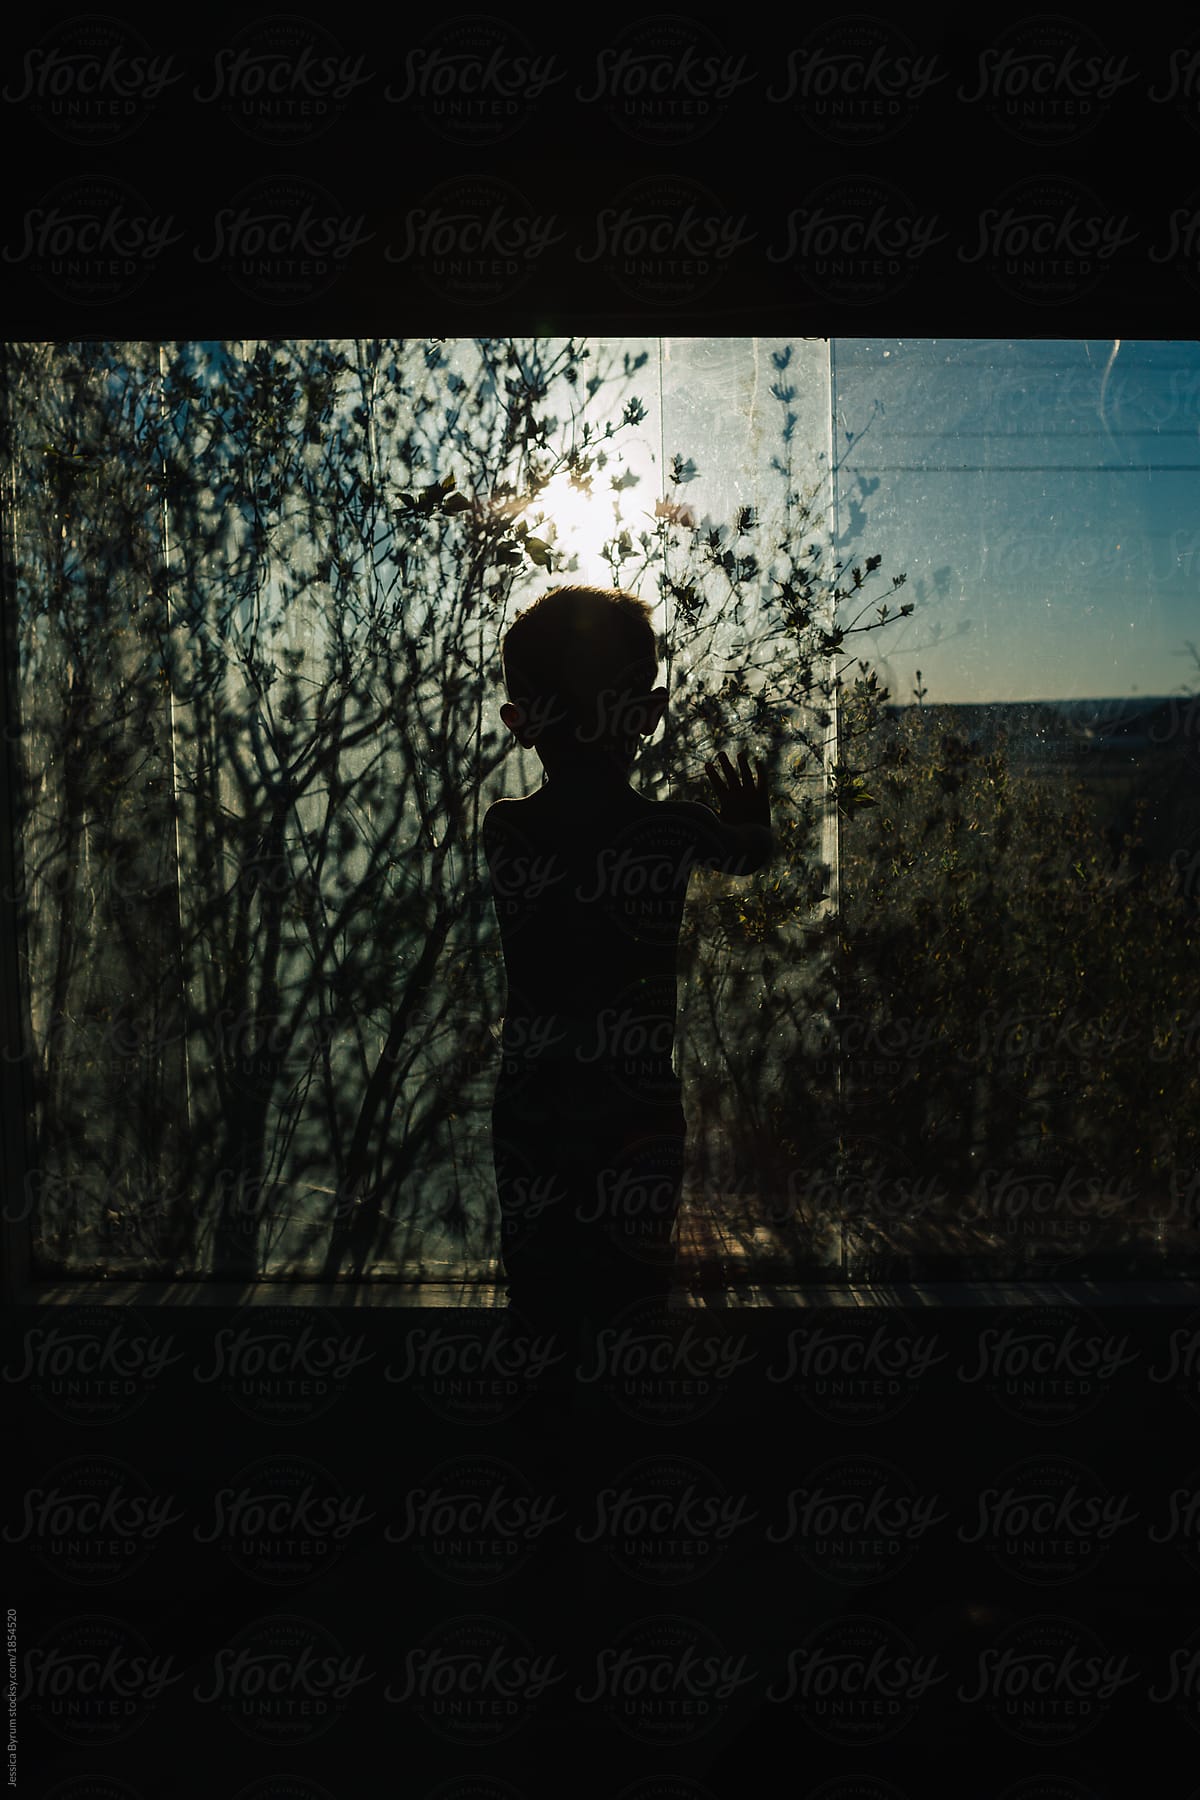 Toddler boy in window with tree limbs casting dark shadows and making a silhouette.